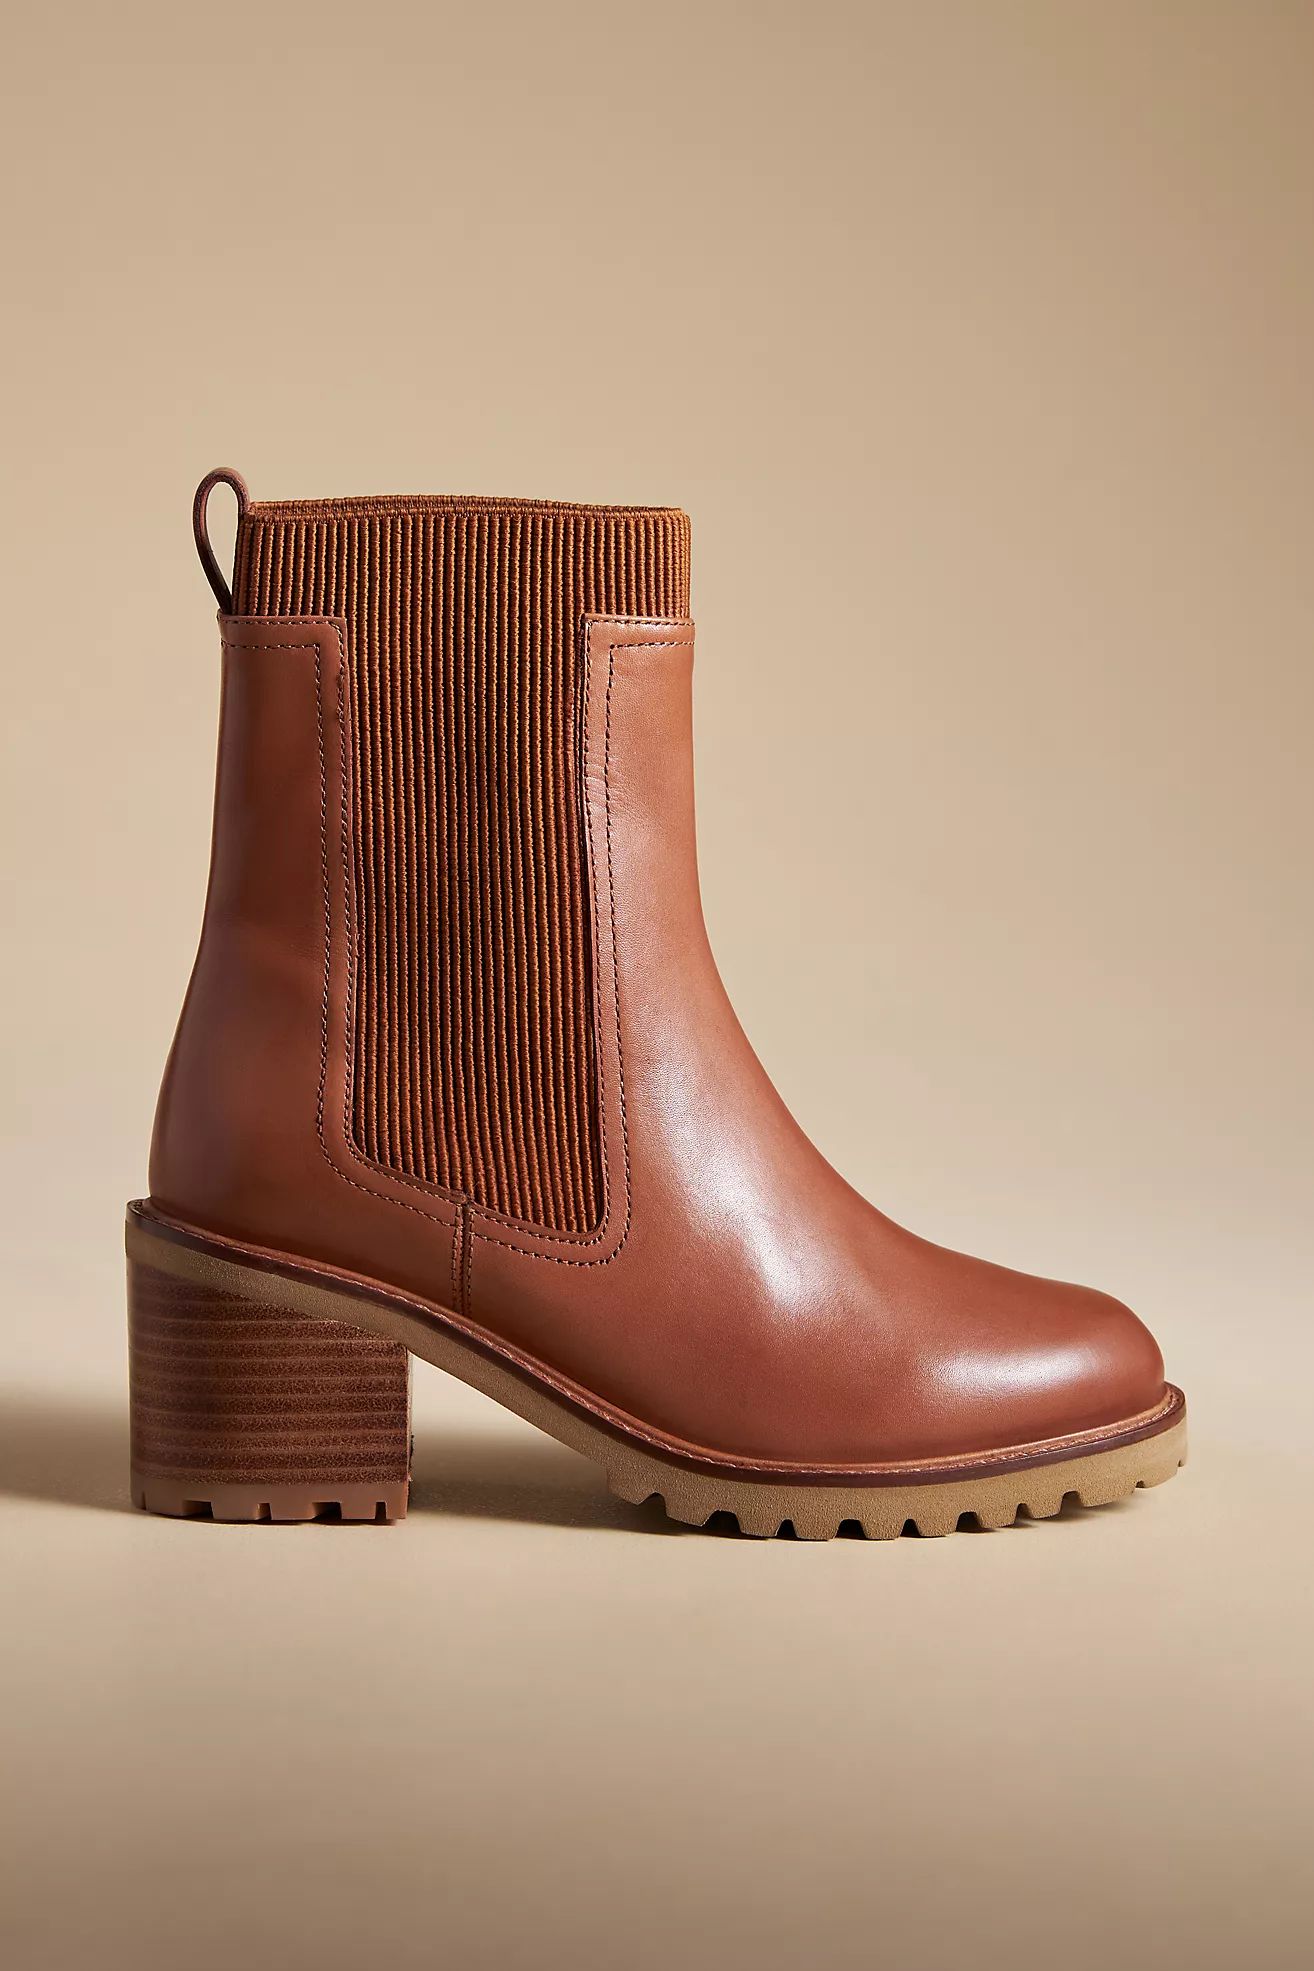 Seychelles Far-Fetched Knit Boots | Anthropologie (US)